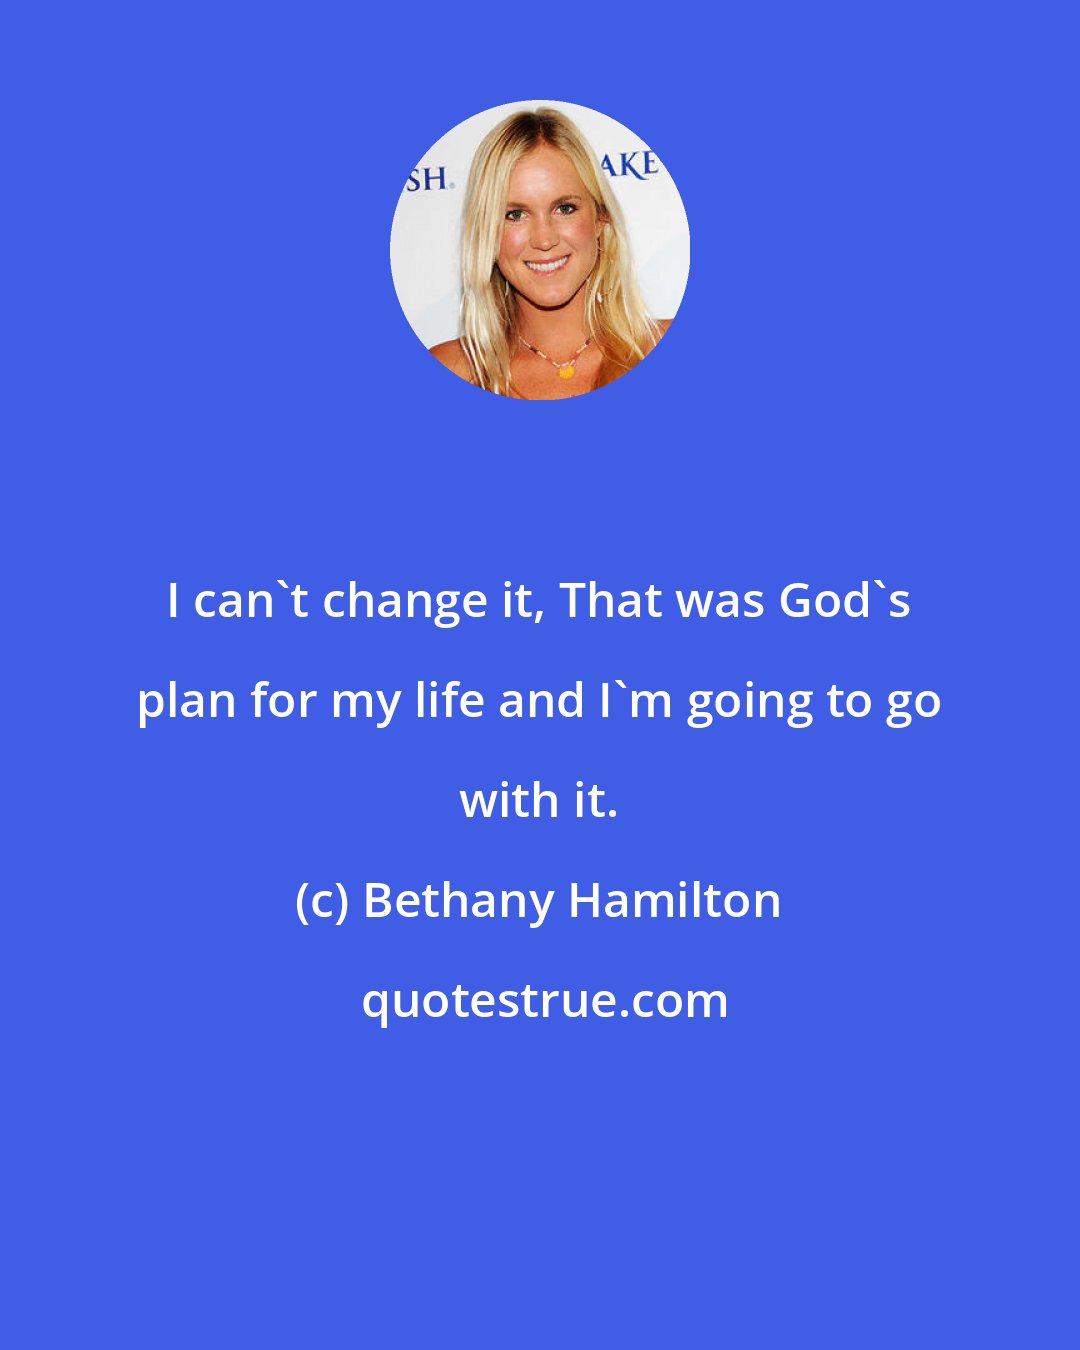 Bethany Hamilton: I can't change it, That was God's plan for my life and I'm going to go with it.